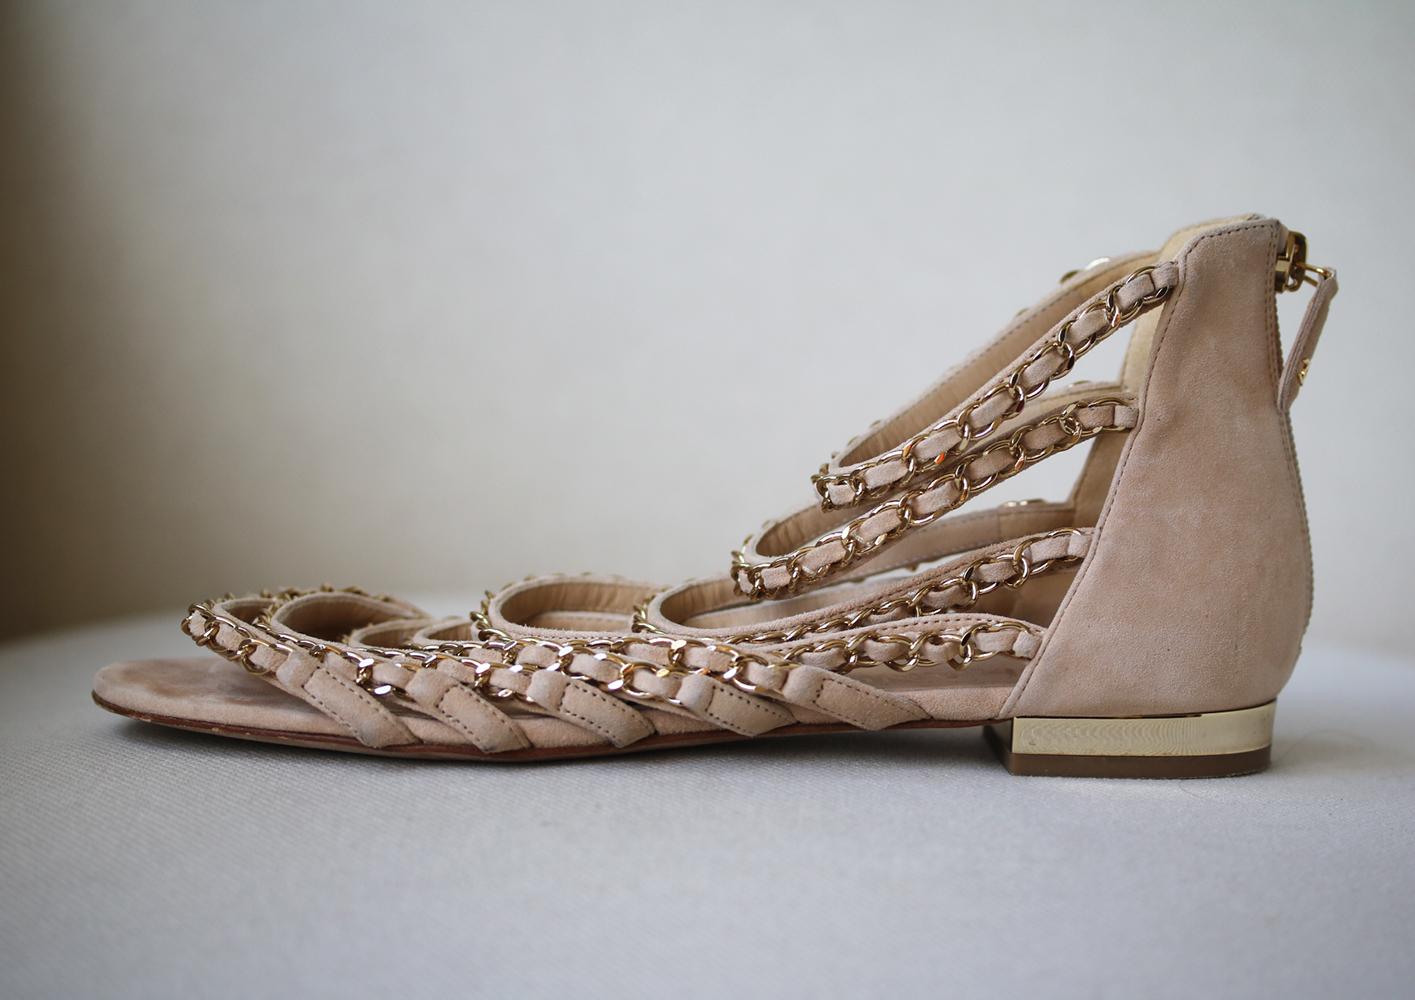 A pair of neutral-hued sandals is a summer essential.
With a comfortable, slight heel, Chanel's suede gladiator style has got our vote.
Heel measures approximately 7.6 mm/ 0.3 inches.
Light-beige suede and gold-tone chains.
Structured front straps,